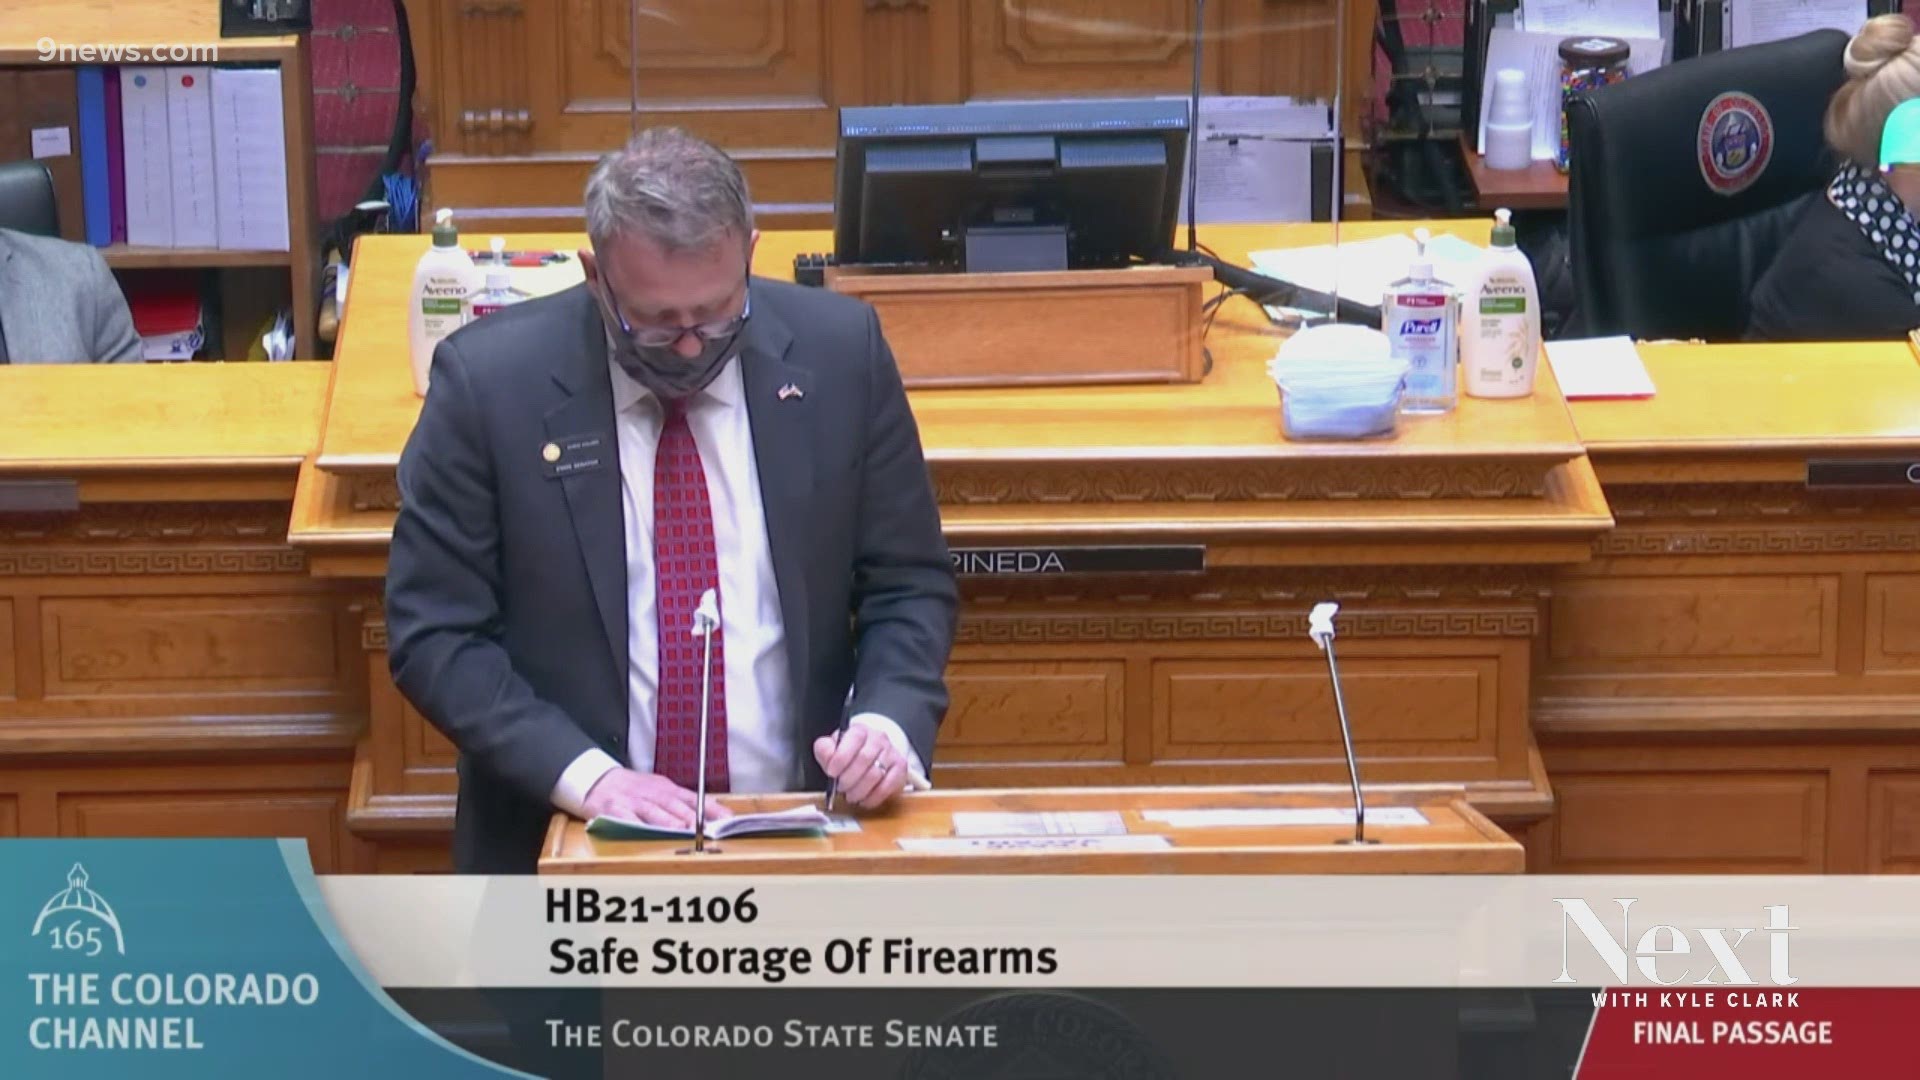 The bill requiring firearms to be properly locked or kept in a safe was sent to Gov. Polis. Democratic Sen. Chris Kolker says he knows personally it will help.